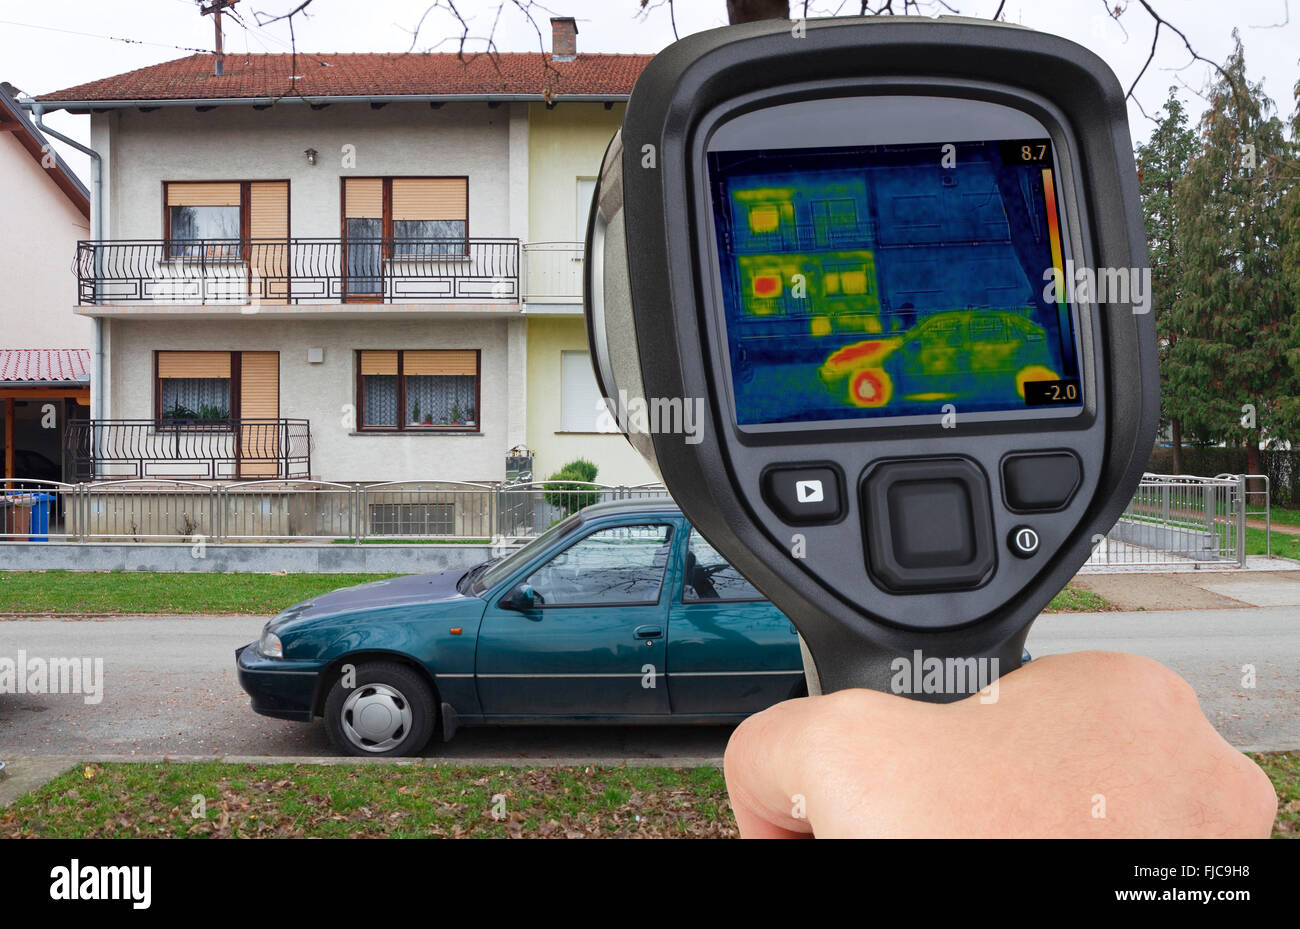 Thermal Image of two Houses Stock Photo